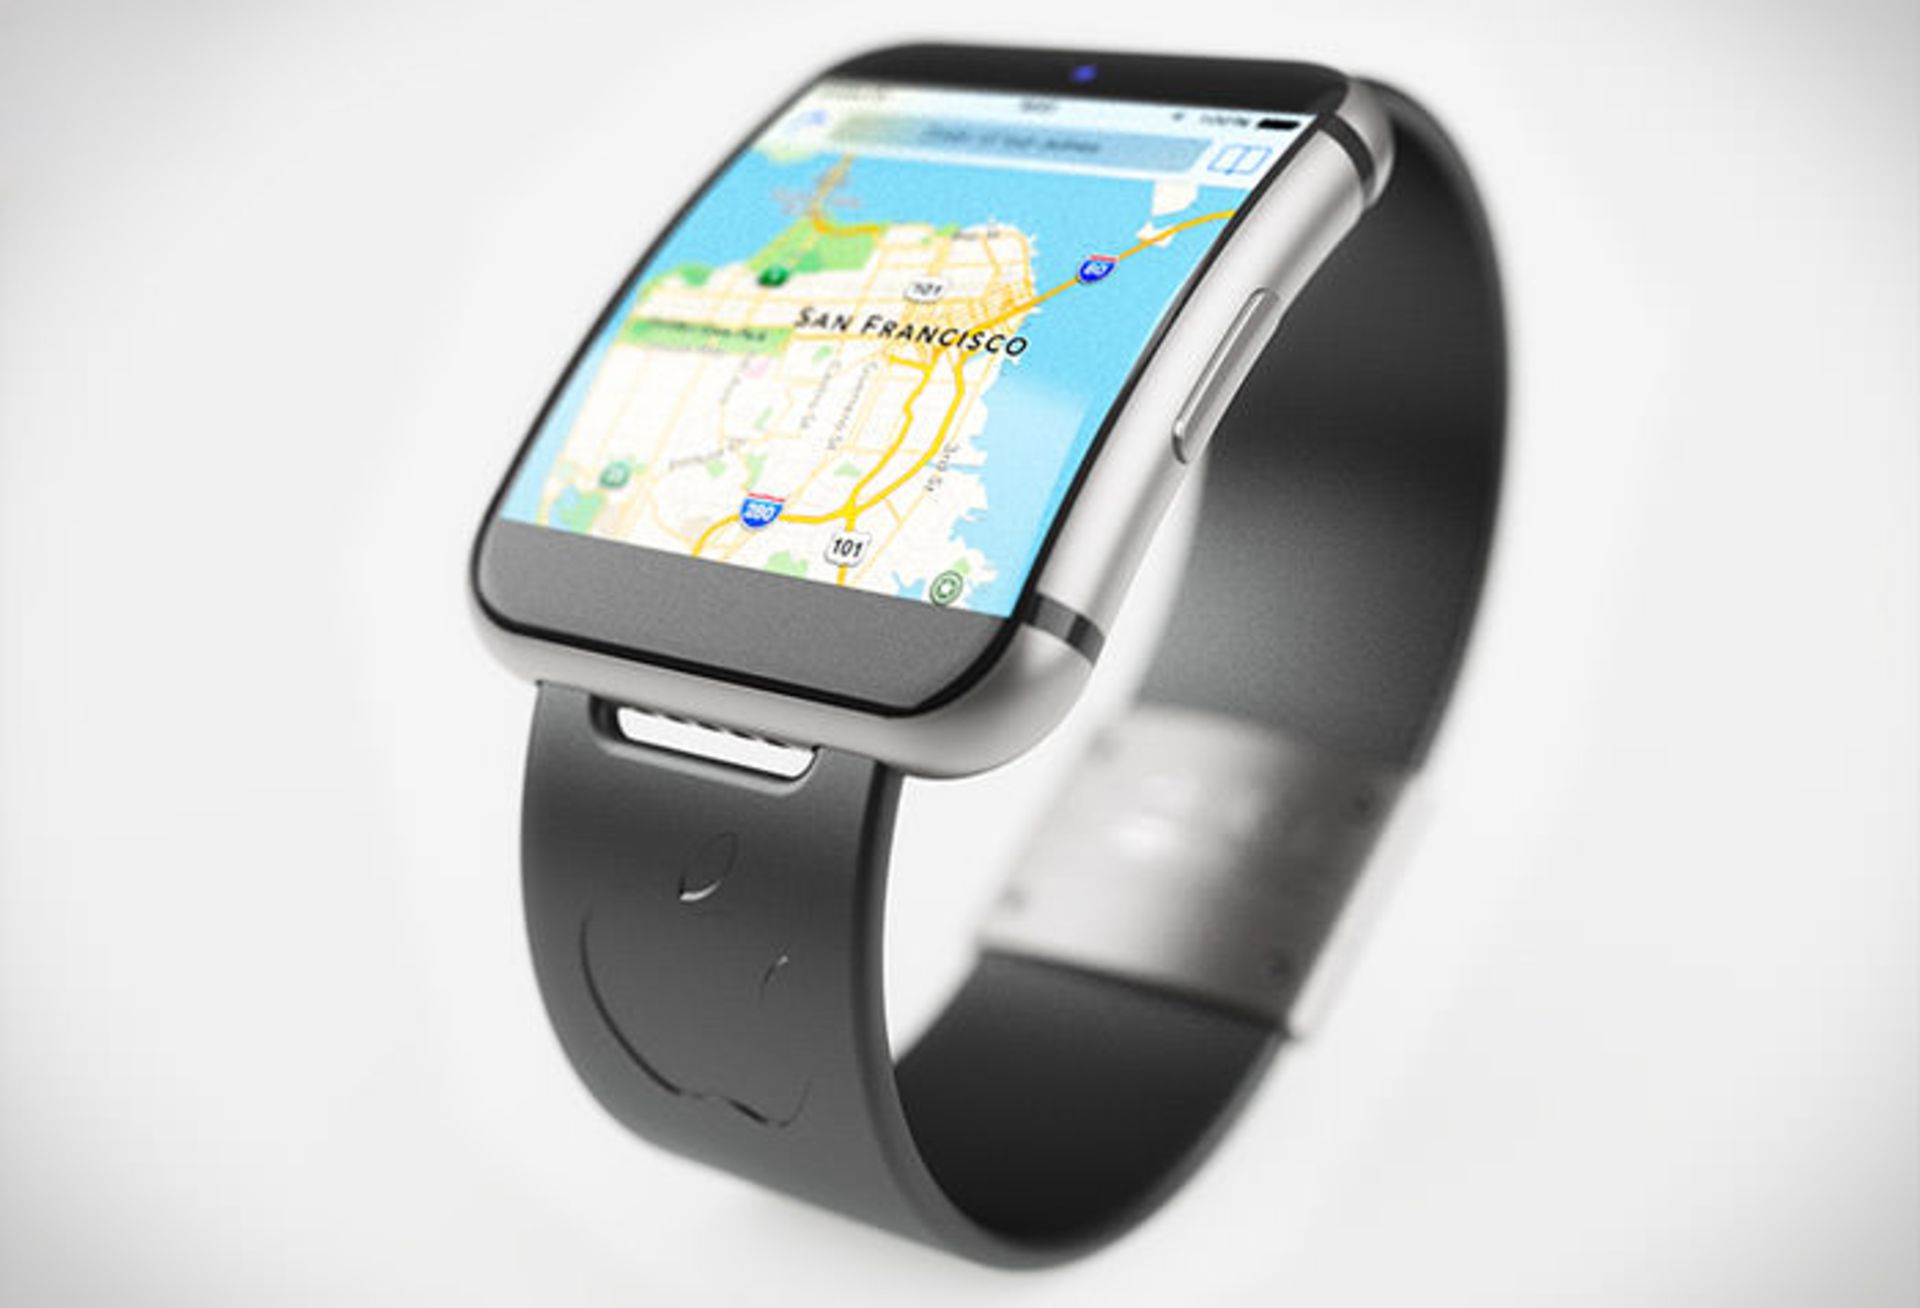 11Apple-iWatch-concept-shows-dreamy-curves-iPhone-esque-looks